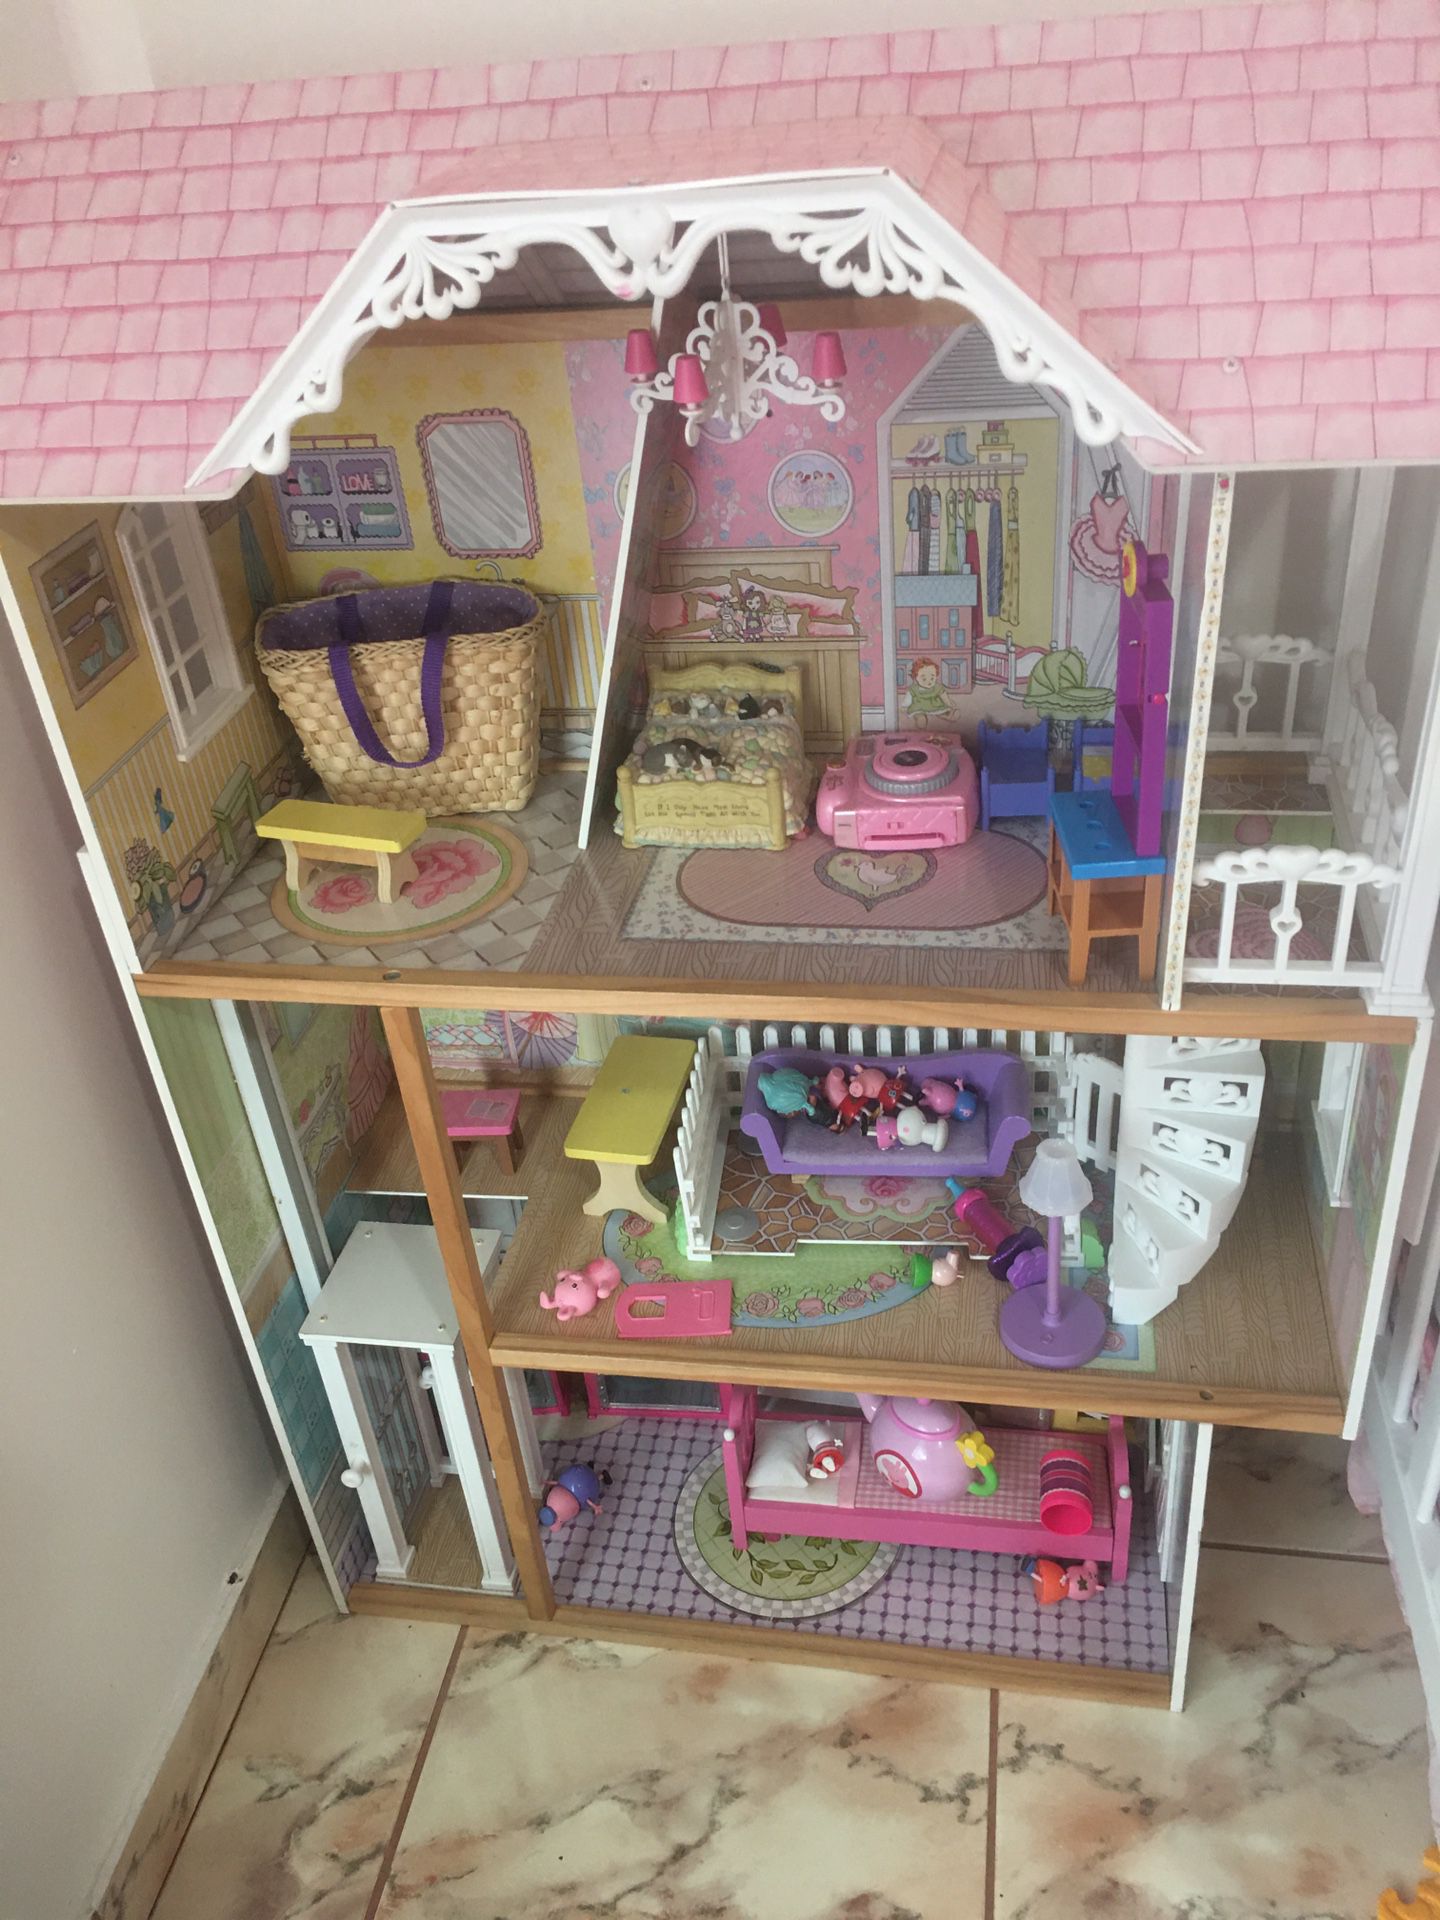 Doll house for toddlers and young girls like new. Toys are not included